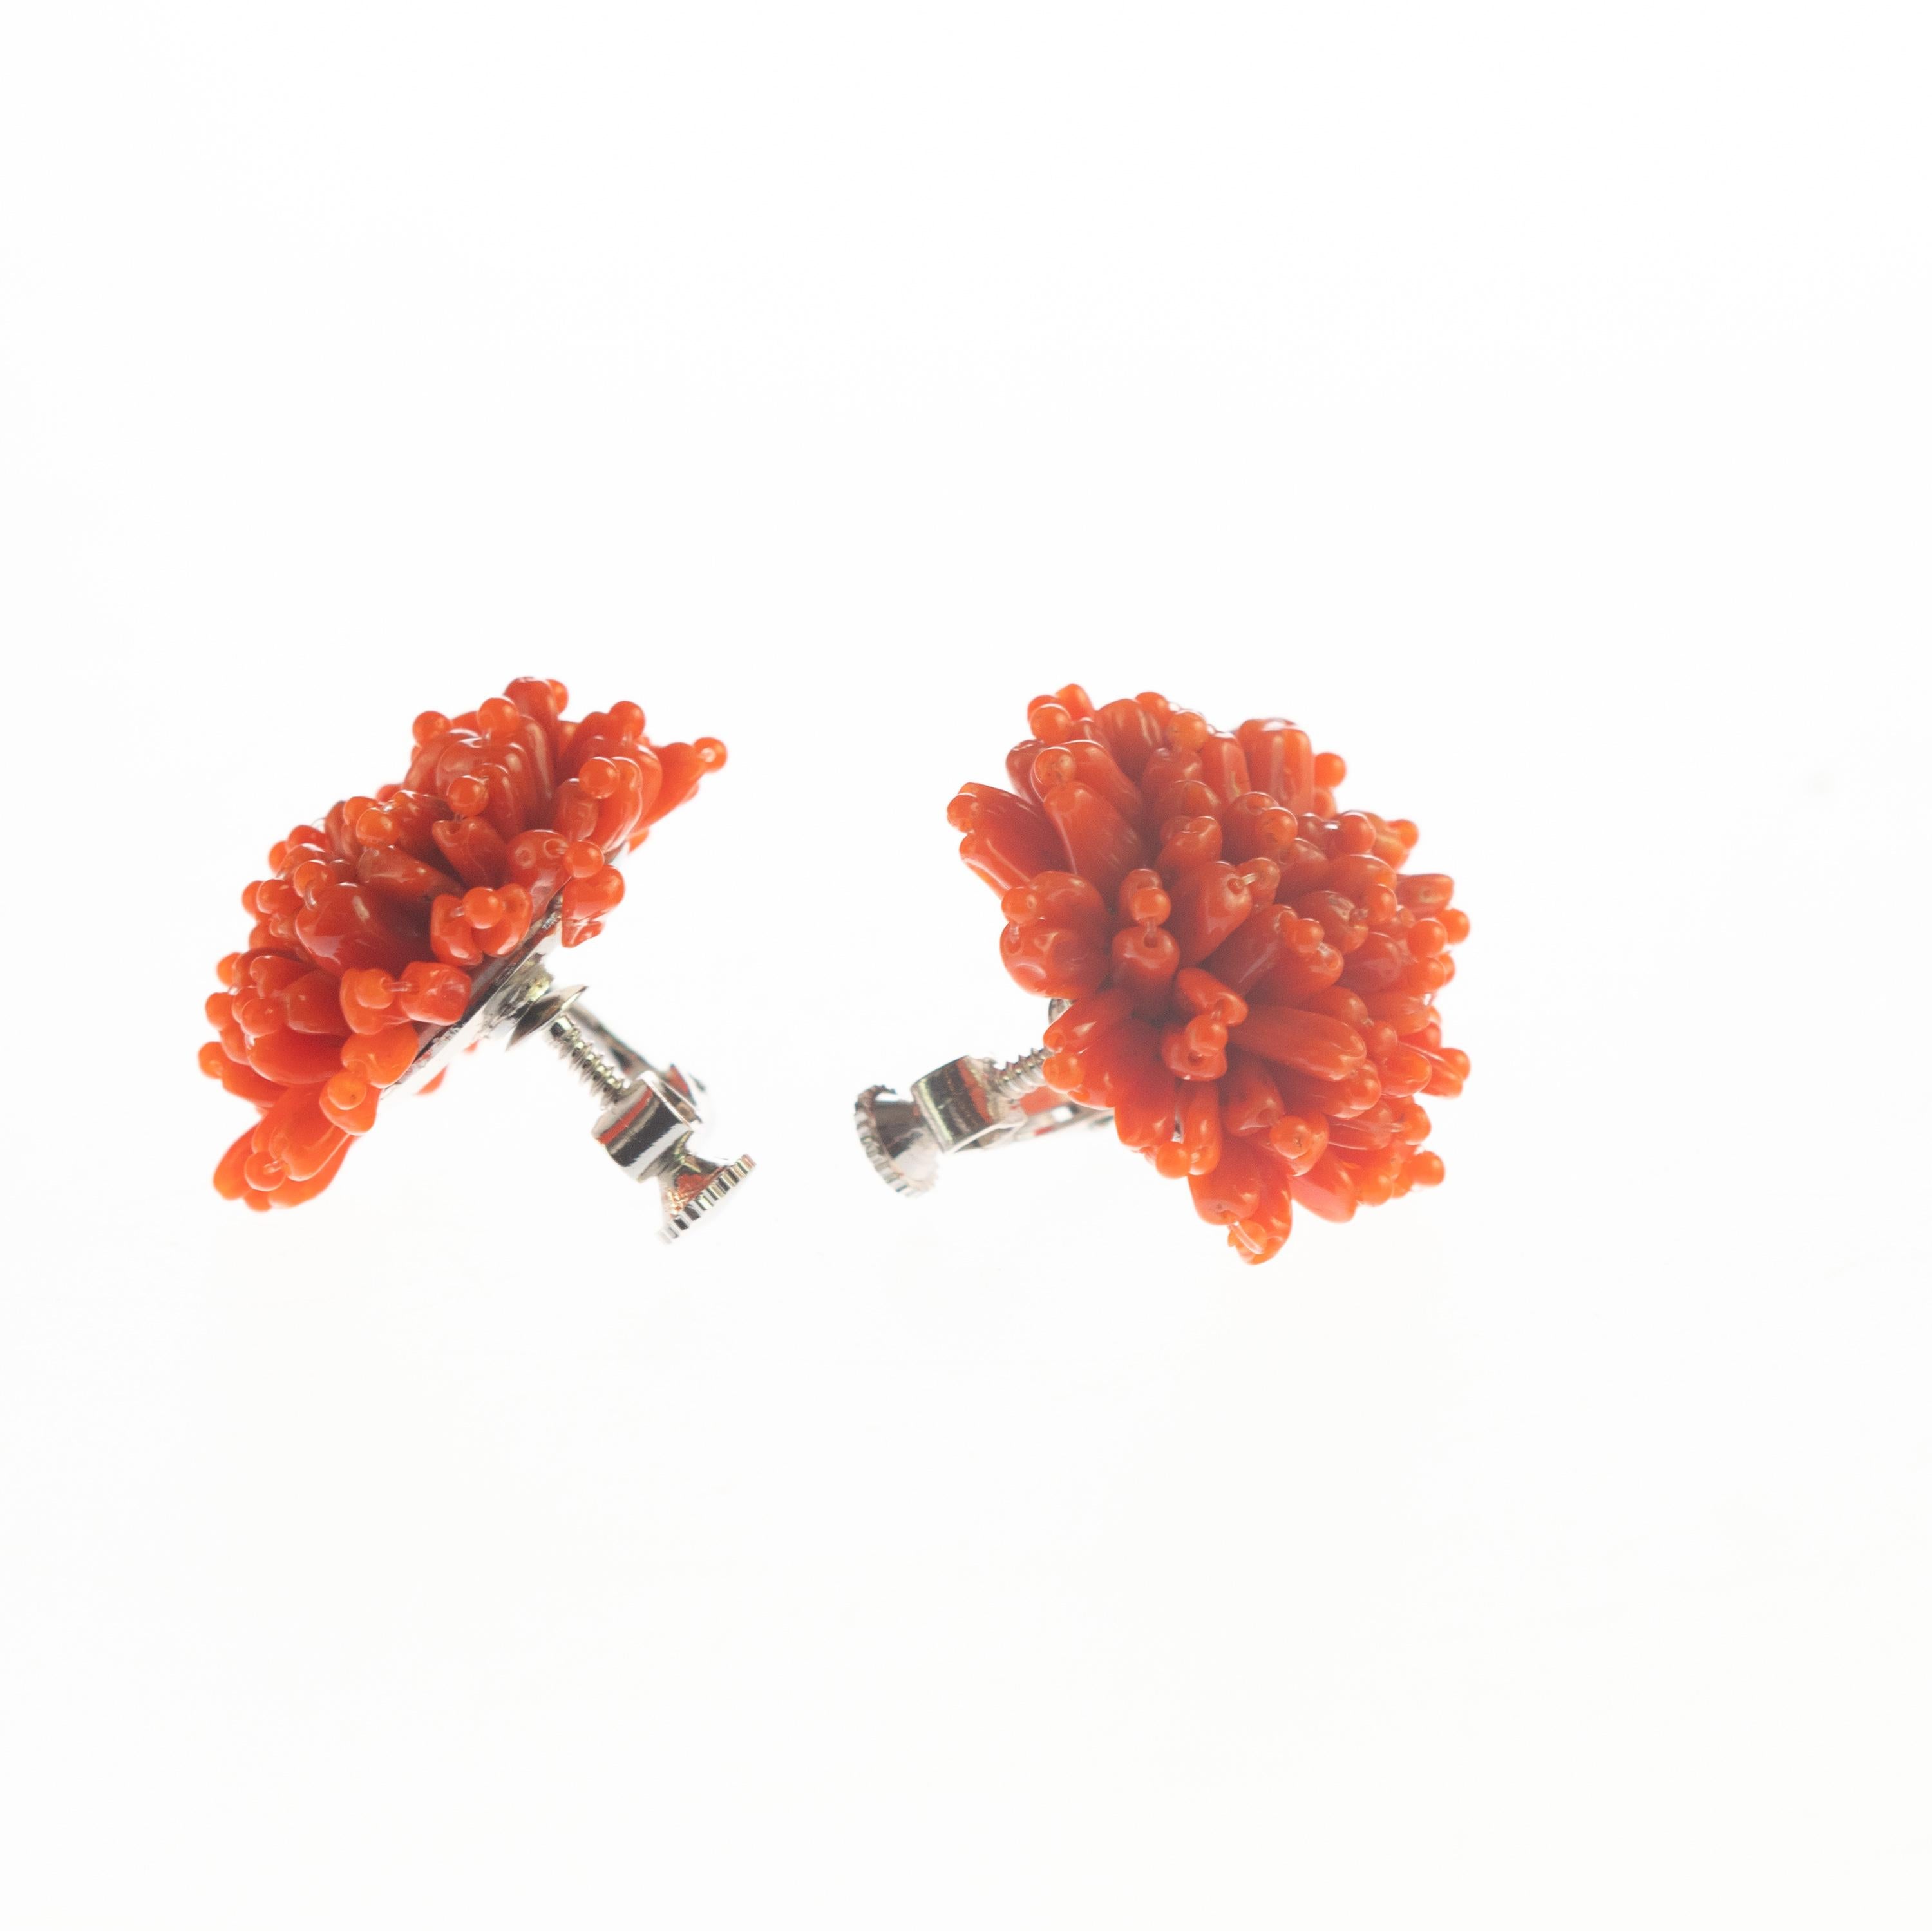 Marvelous and splendid design of mediterranean red coral flowers that evoke the magic and delicacy of Italian designs. The simplicity of the piece that creates a unique and unrepeatable cocktail jewel. Clip on earrings with stunning natural coral